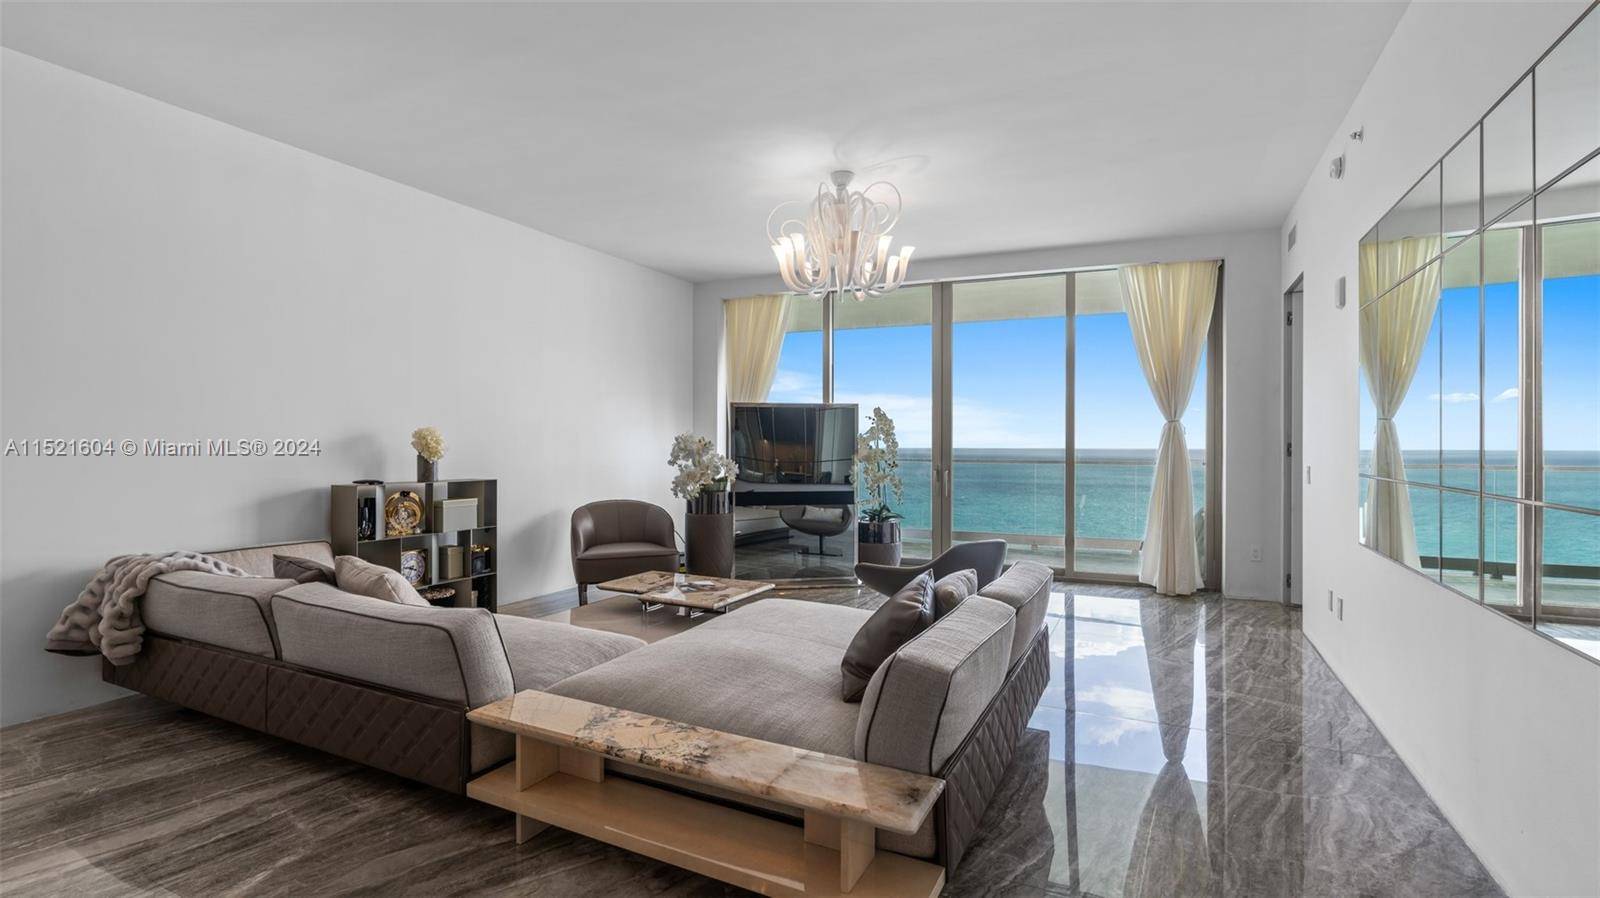 This gorgeous oceanfront condo at one of the top luxury buildings in Sunny Isles boasts more than 3000 sq ft 3 BD 5.